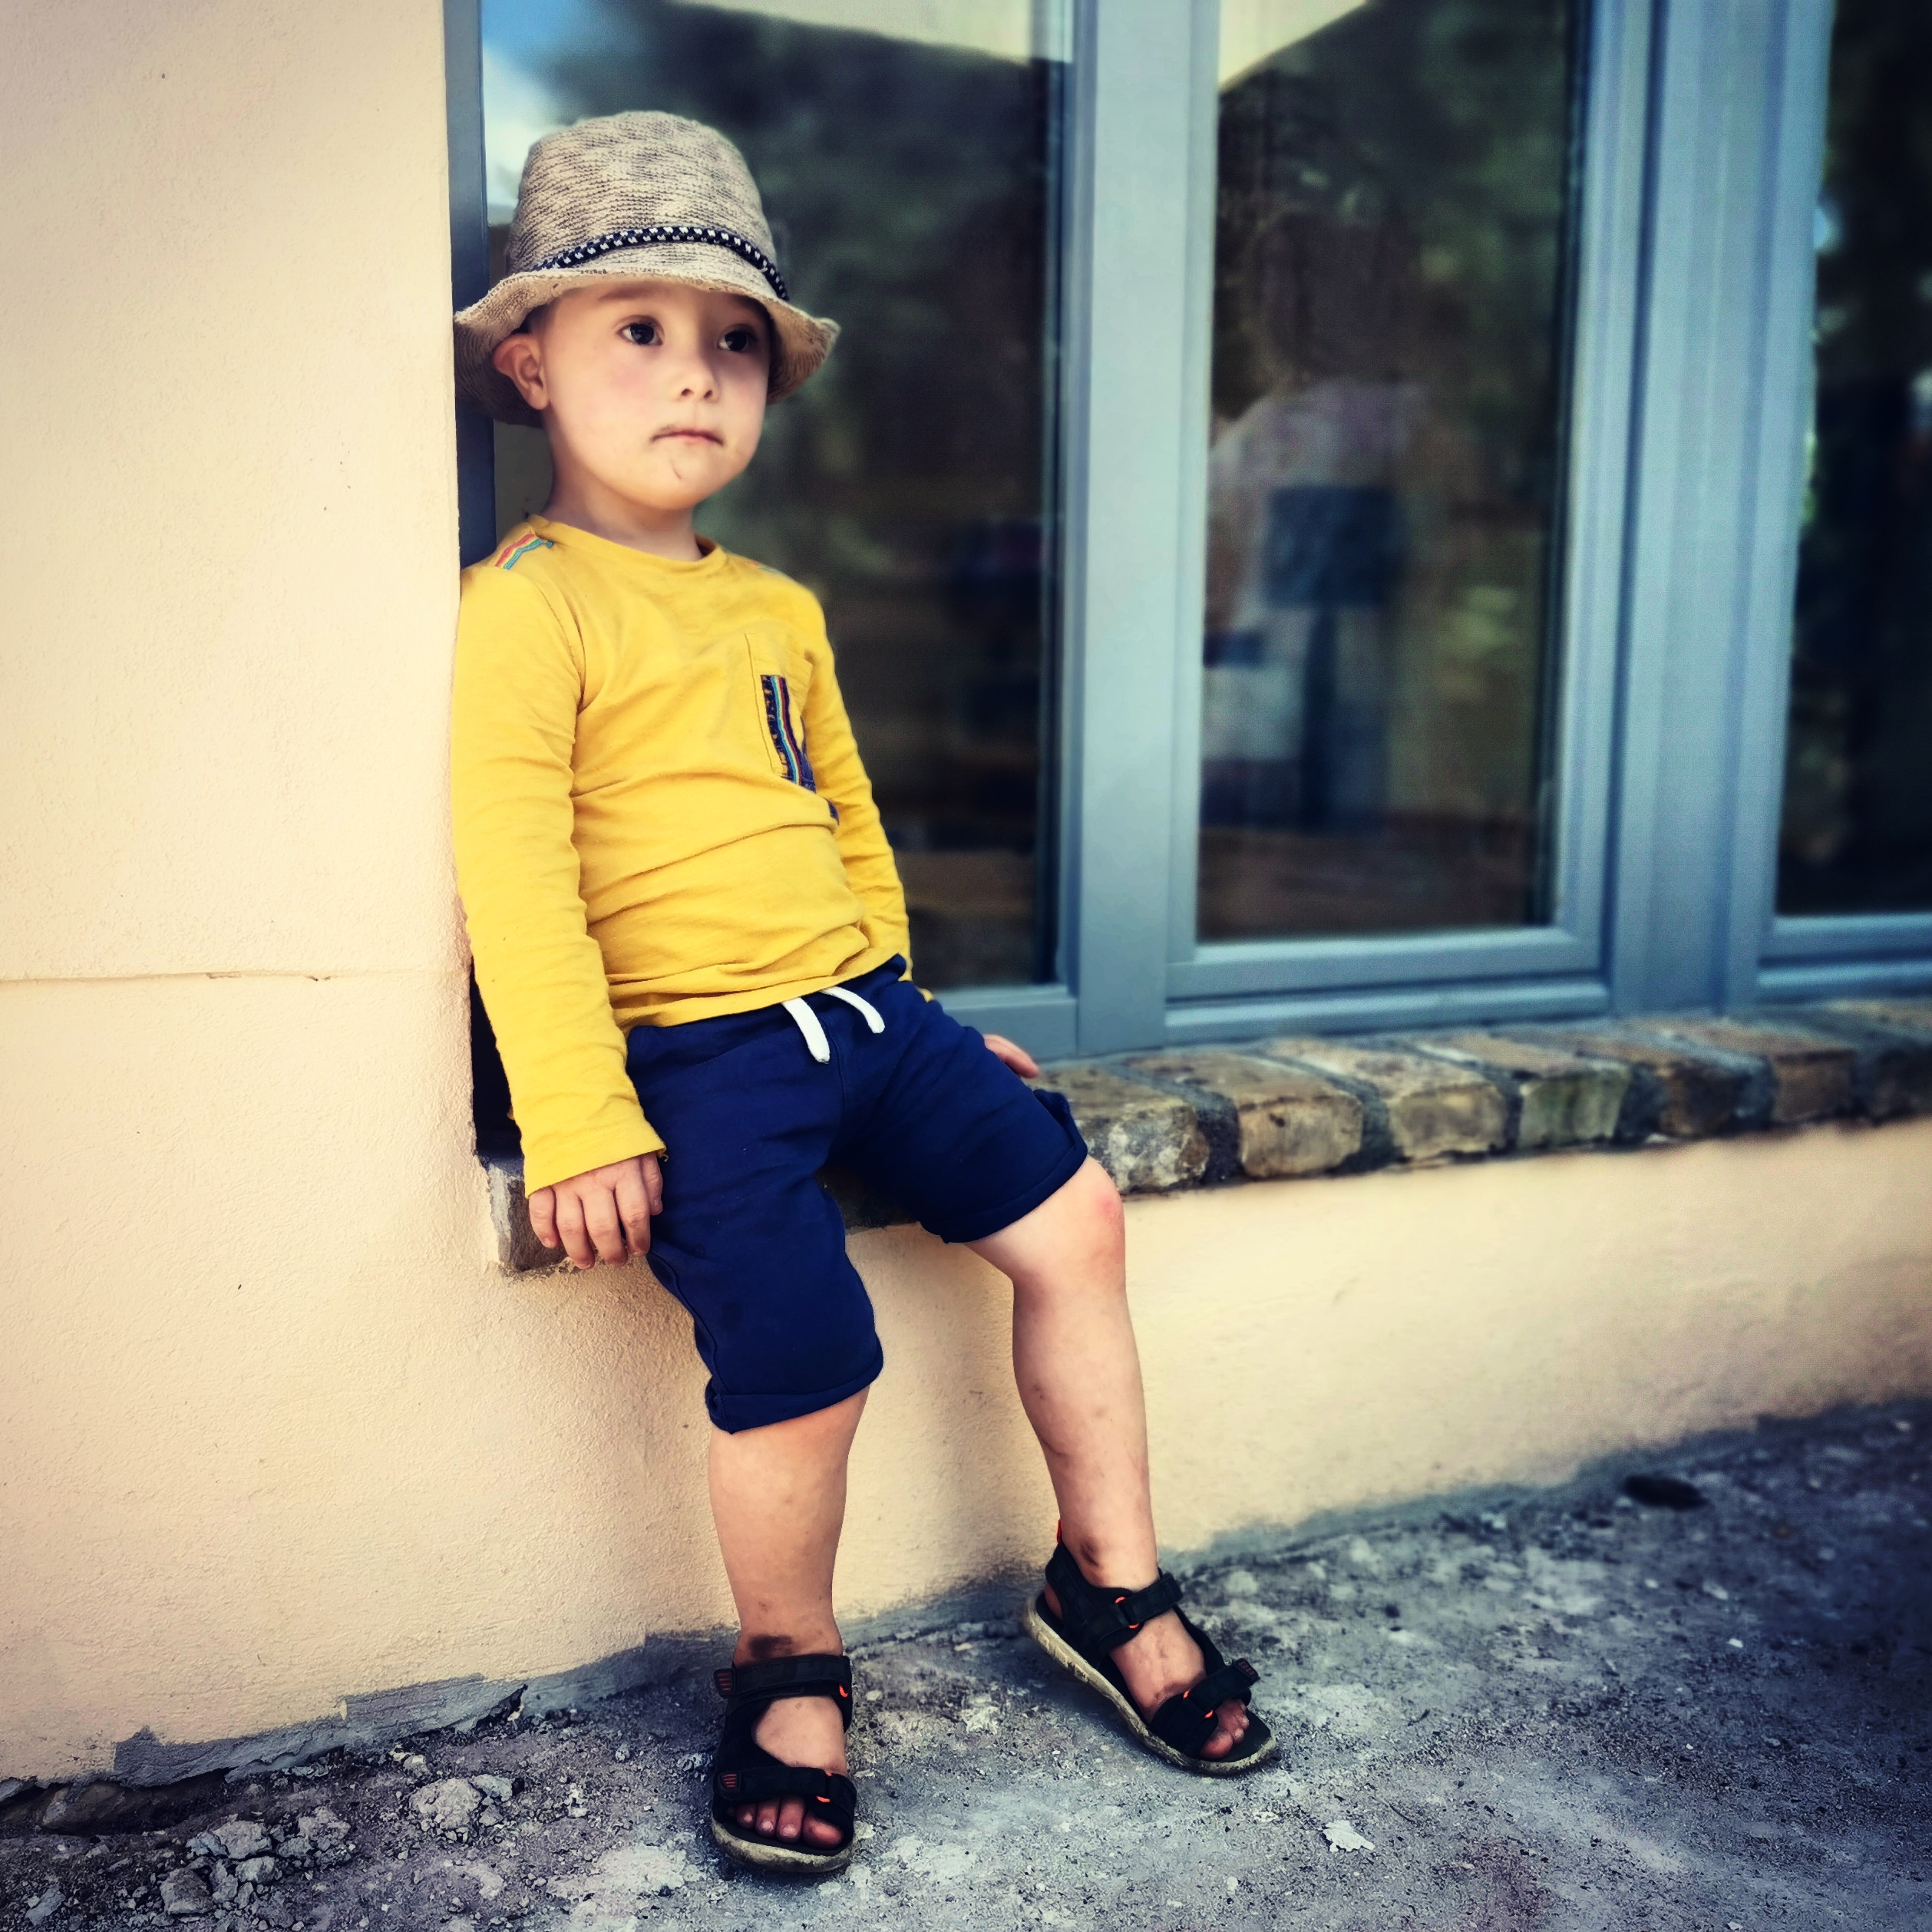 A little boy in blue shorts, a yellow tshirt and a hat sit on a window sill.